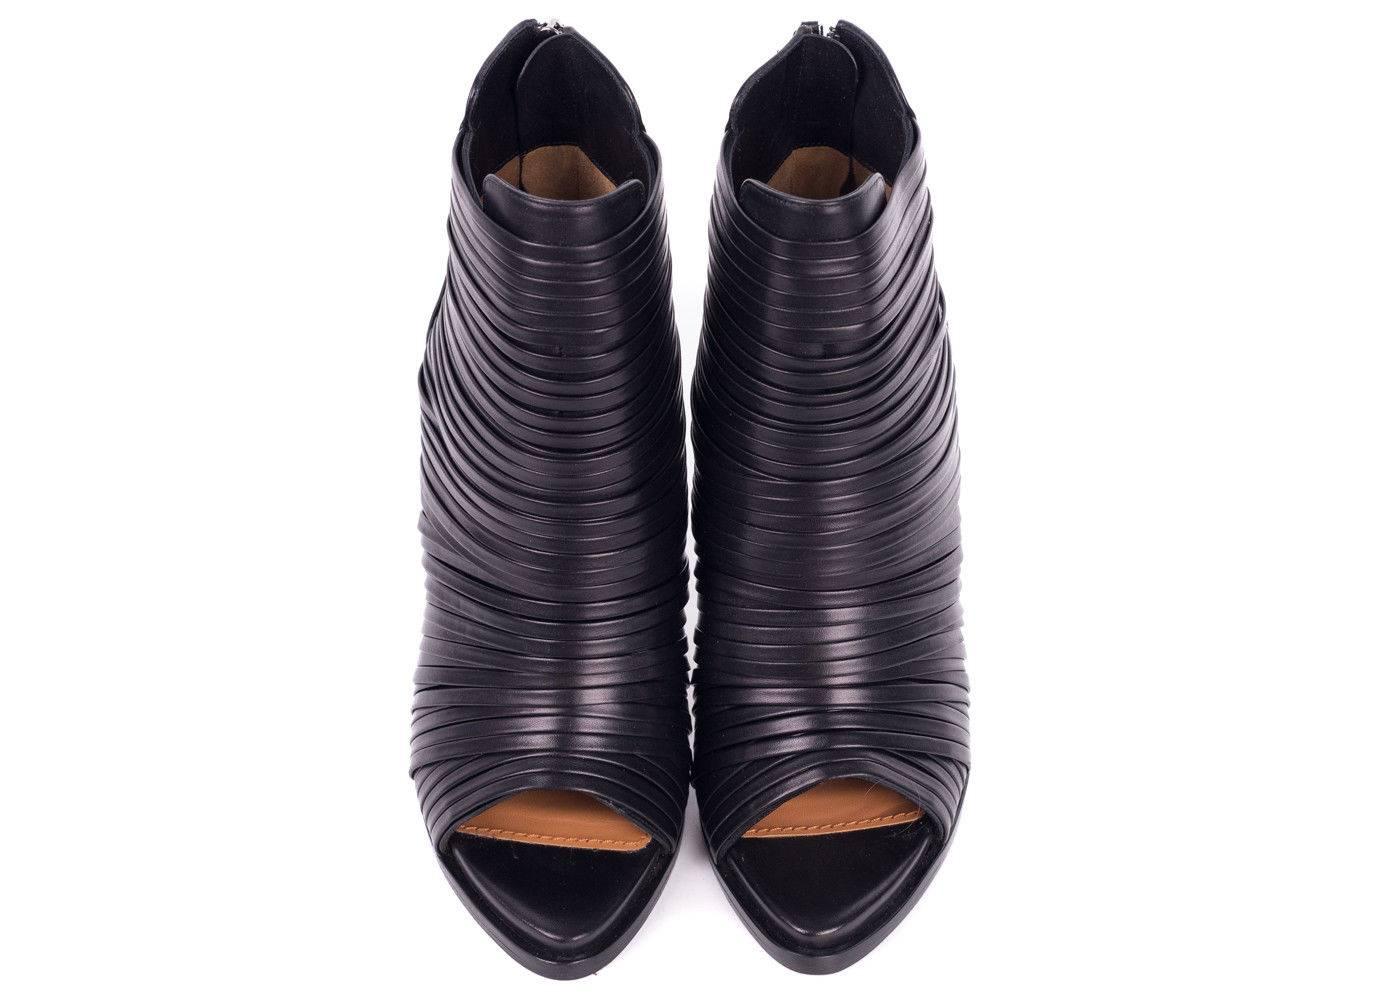 You are the woman of the hour in your leather Givenchy Wrap Strap Booties. These heels feature gathered leather wrap straps and a tasteful peep toe. The perfectly sculpted five inch cone heel add a artistic twist to your conventional heel. Pair this